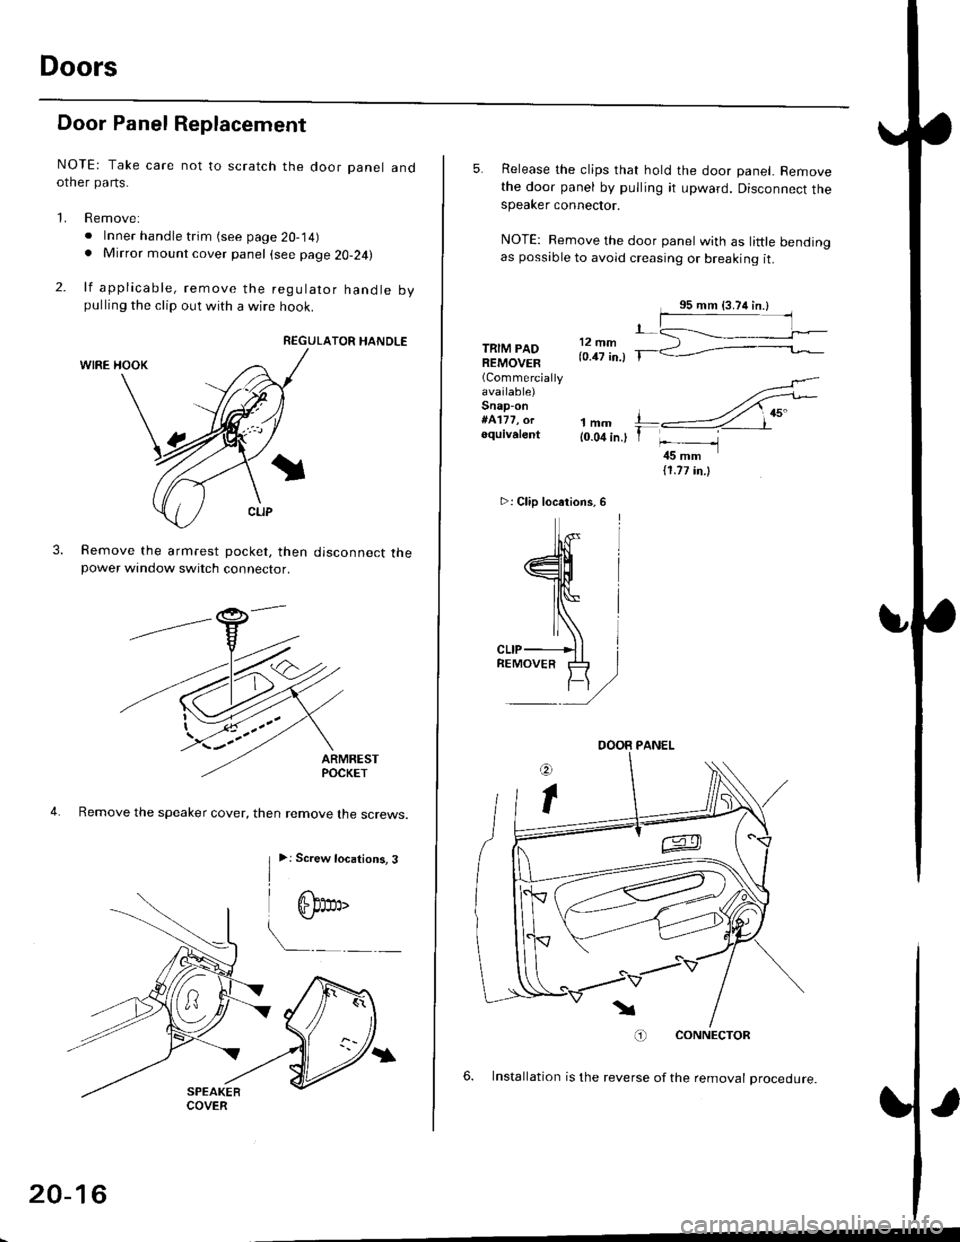 HONDA CIVIC 1996 6.G Workshop Manual Doors
Door Panel Replacement
NOTE: Take care not to scratch the door panel andother pa rts.
1. Remove:
. Inner handle trim (see page 20-14). Mirror mount cover panel (see page 20-24)
2. lf applicable